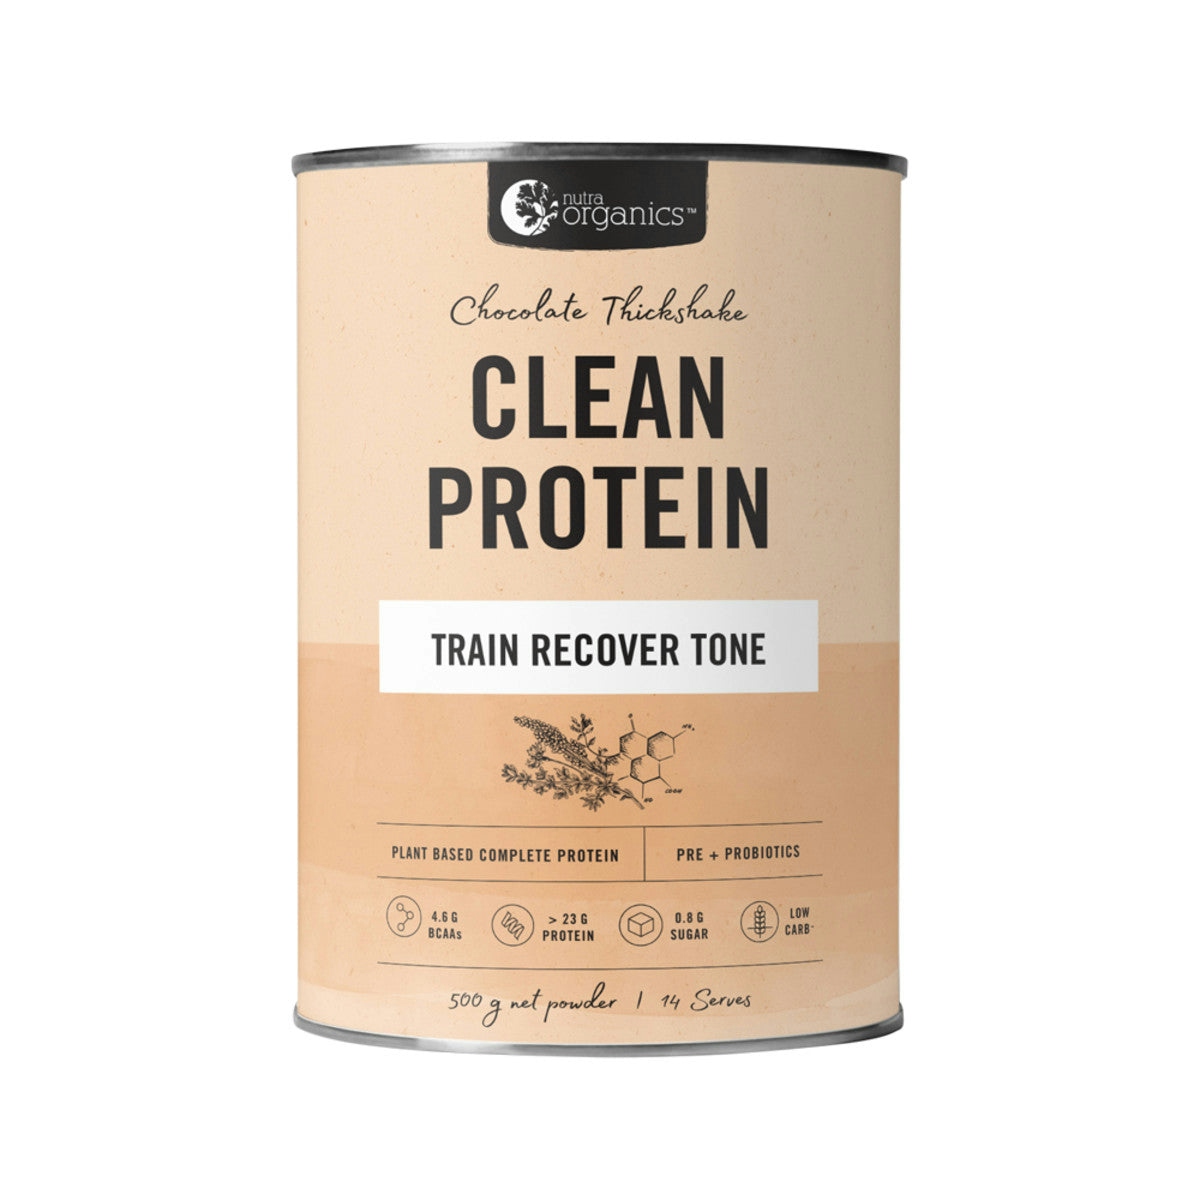 image of Nutra Organics Clean Protein Chocolate Thickshake 500g on white background 